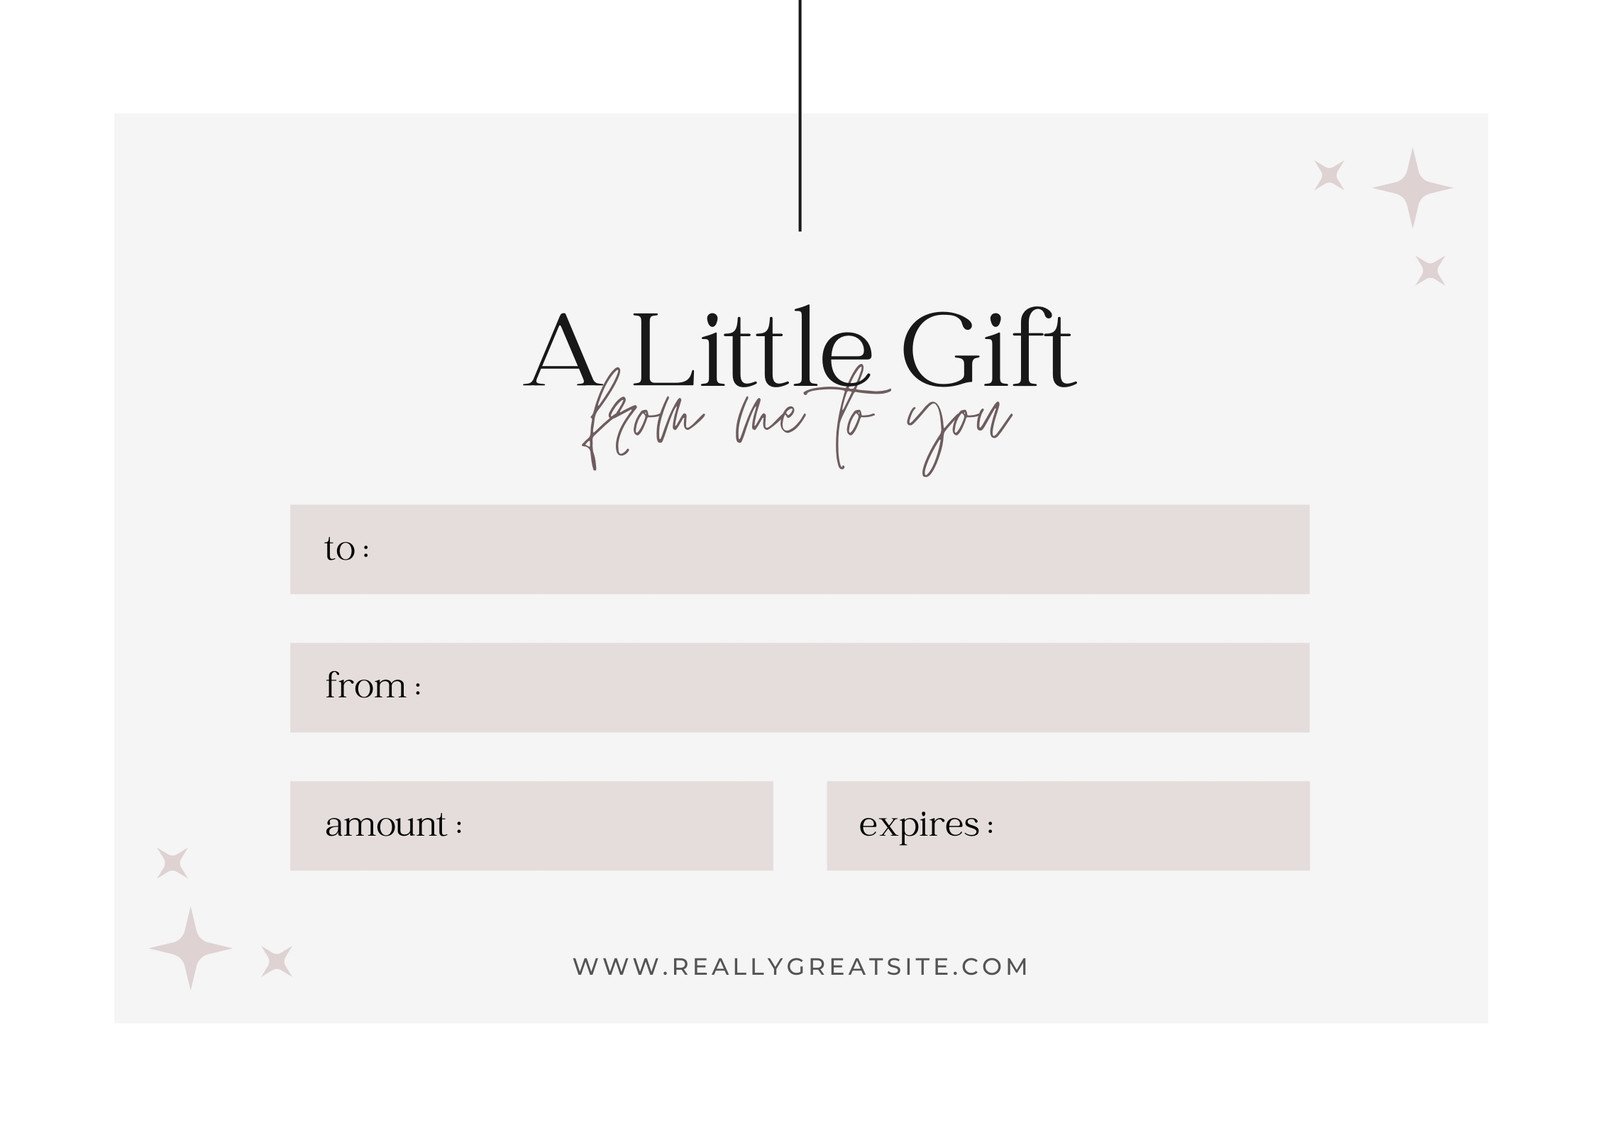 Free, printable gift certificate templates to customize  Canva With This Certificate Entitles The Bearer To Template